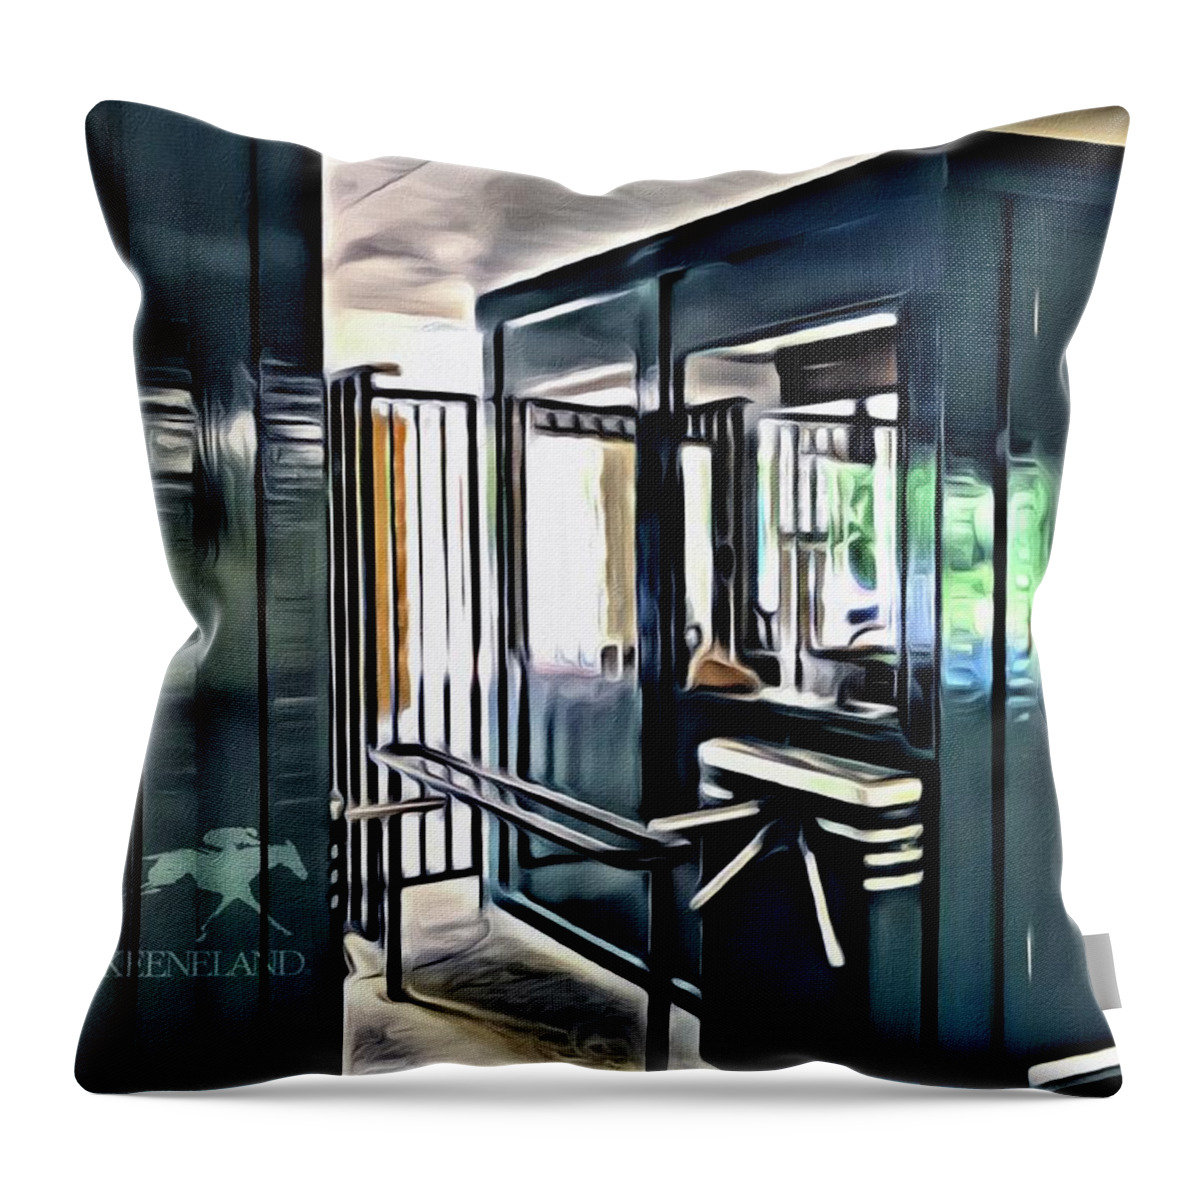 Keeneland Throw Pillow featuring the digital art Keeneland Turnstile by CAC Graphics